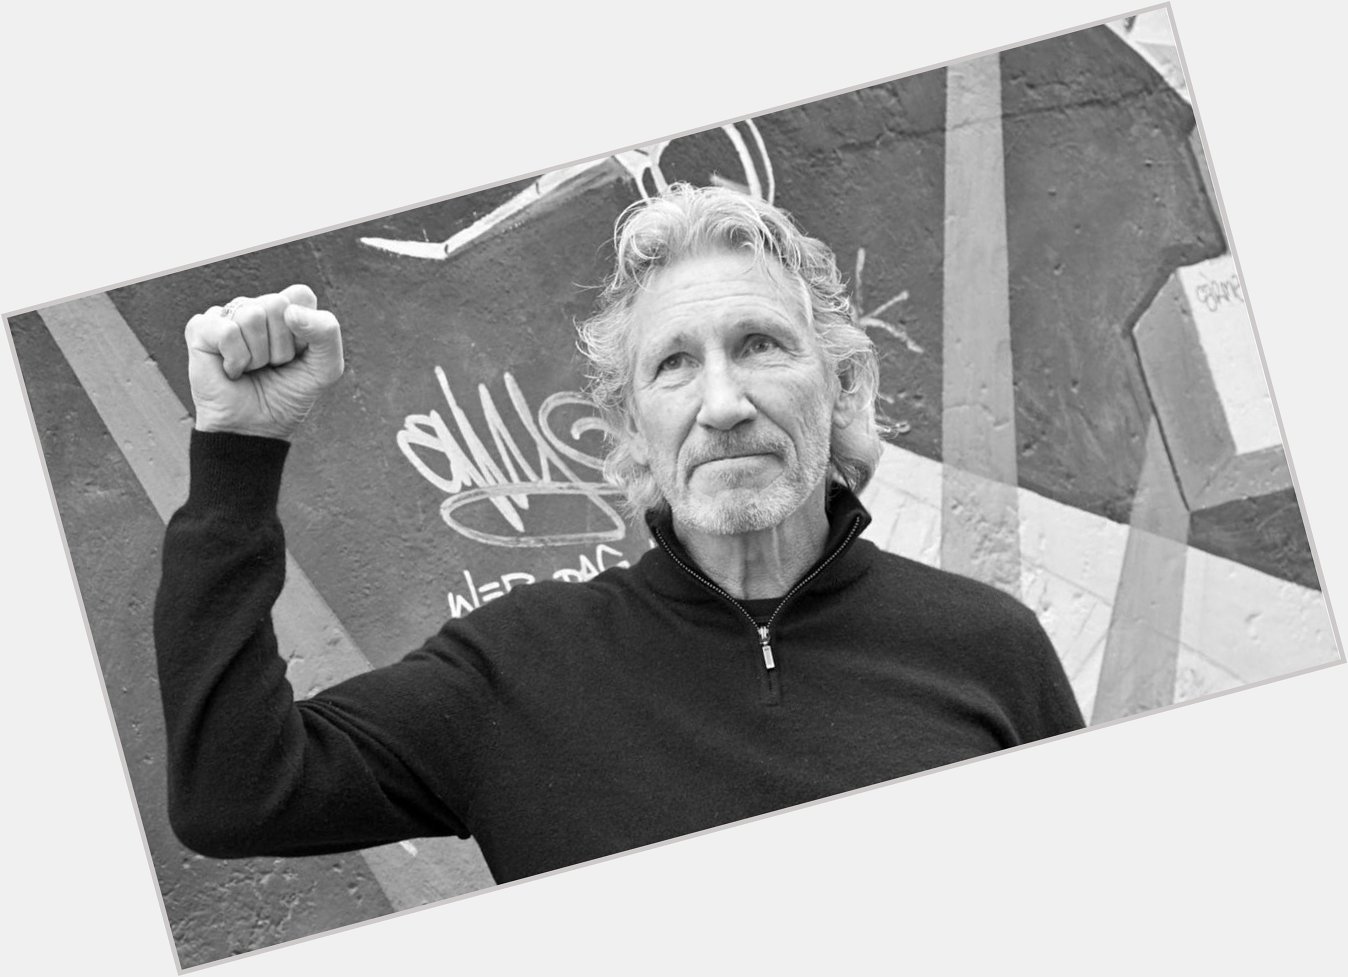 Happy birthday to Roger Waters, who is 72 today! 